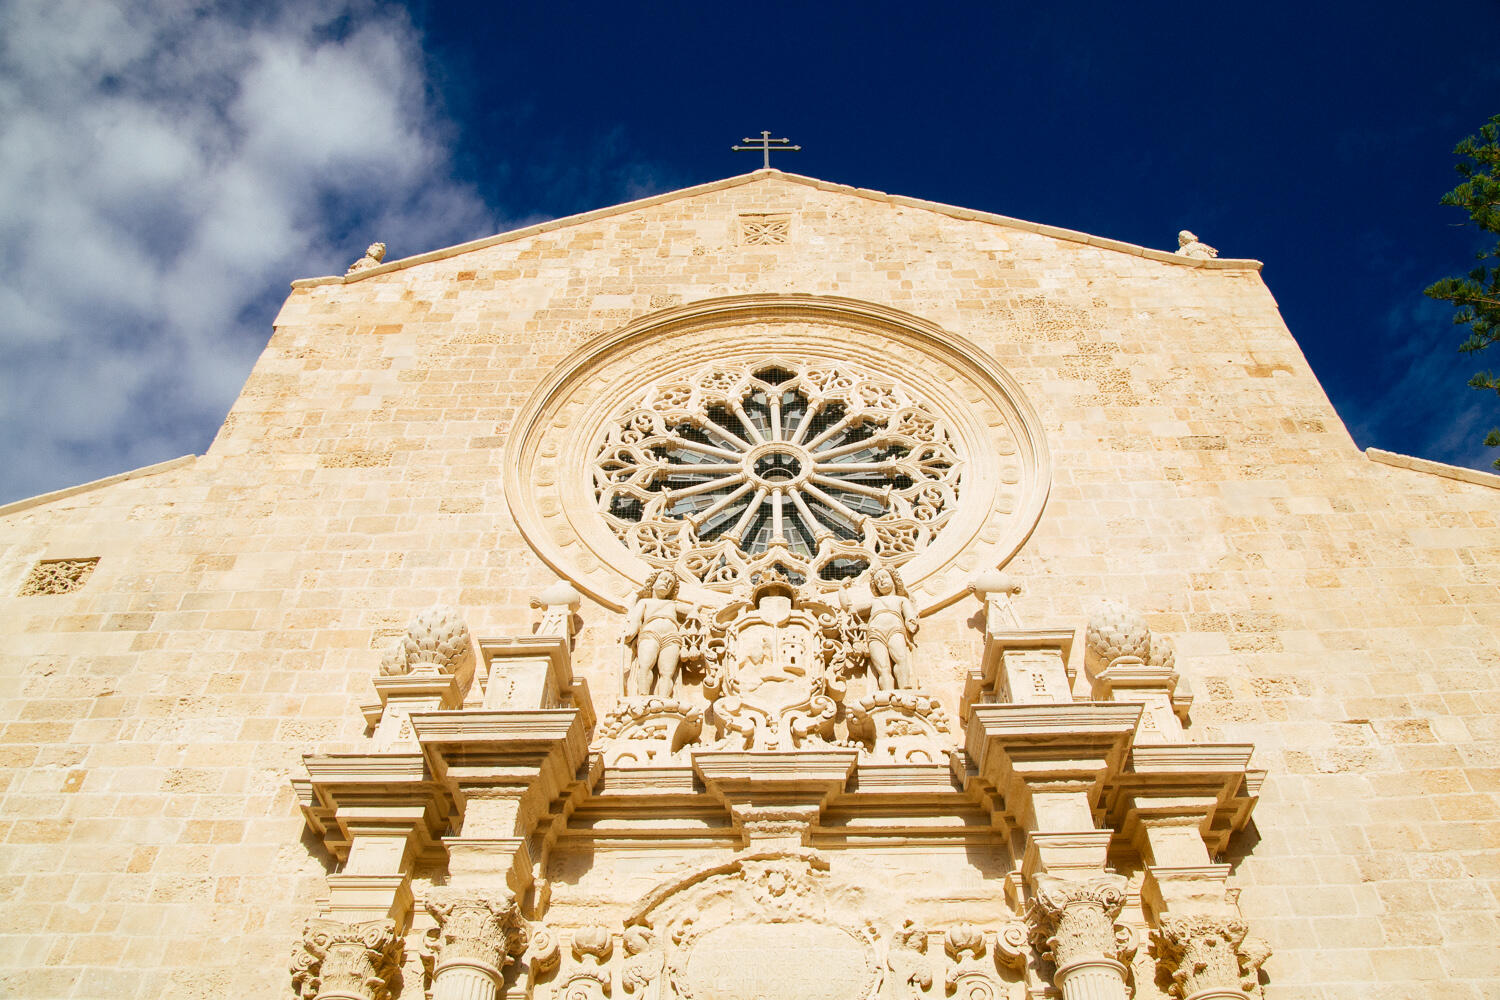 Otranto, historic center with important romanic cathedral mosaic